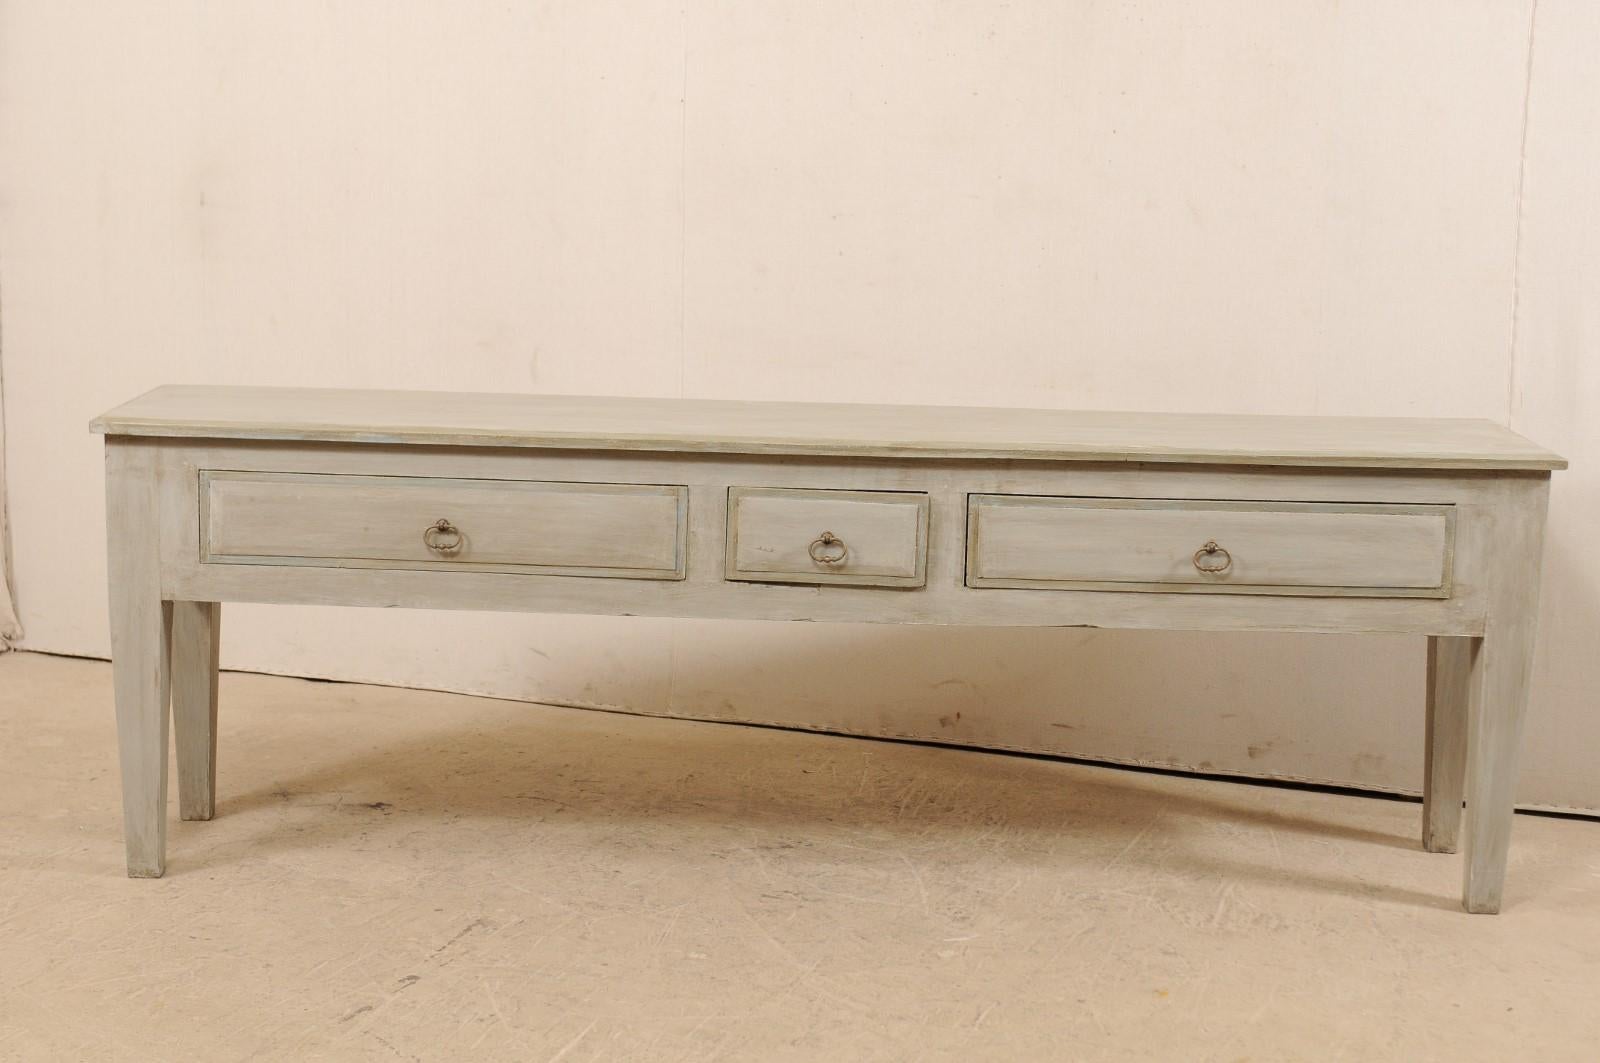 Carved Long Brazilian Painted Wood Console Table with Nice Clean Lines